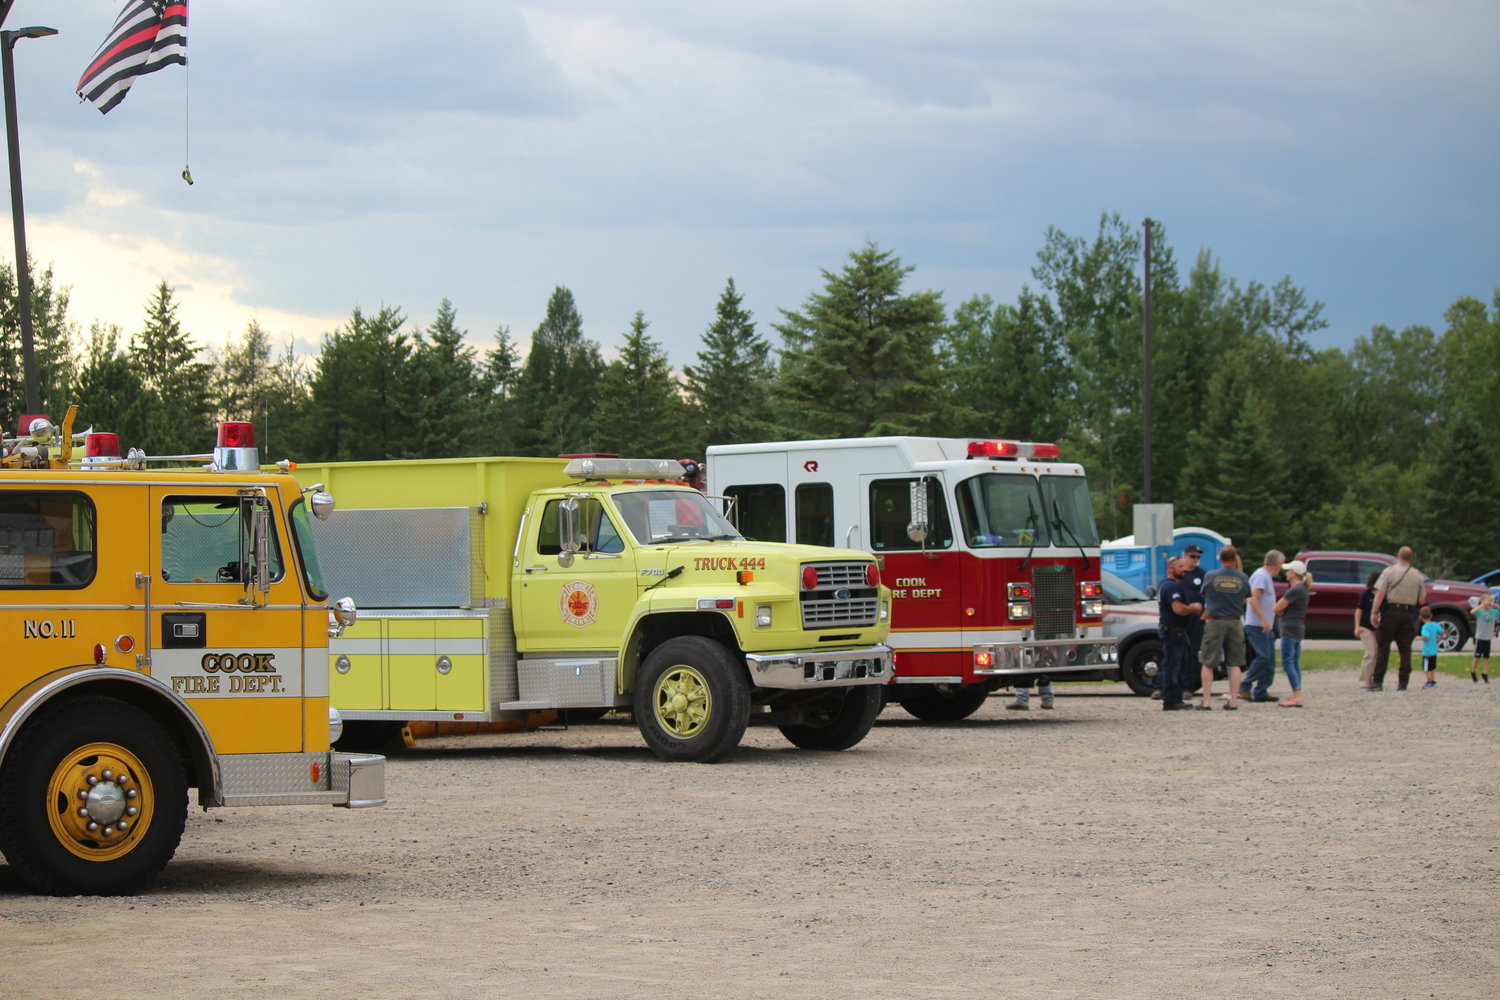 Visitors were given the opportunity to explore emergency vehicles in the Cook Community Center parking lot.